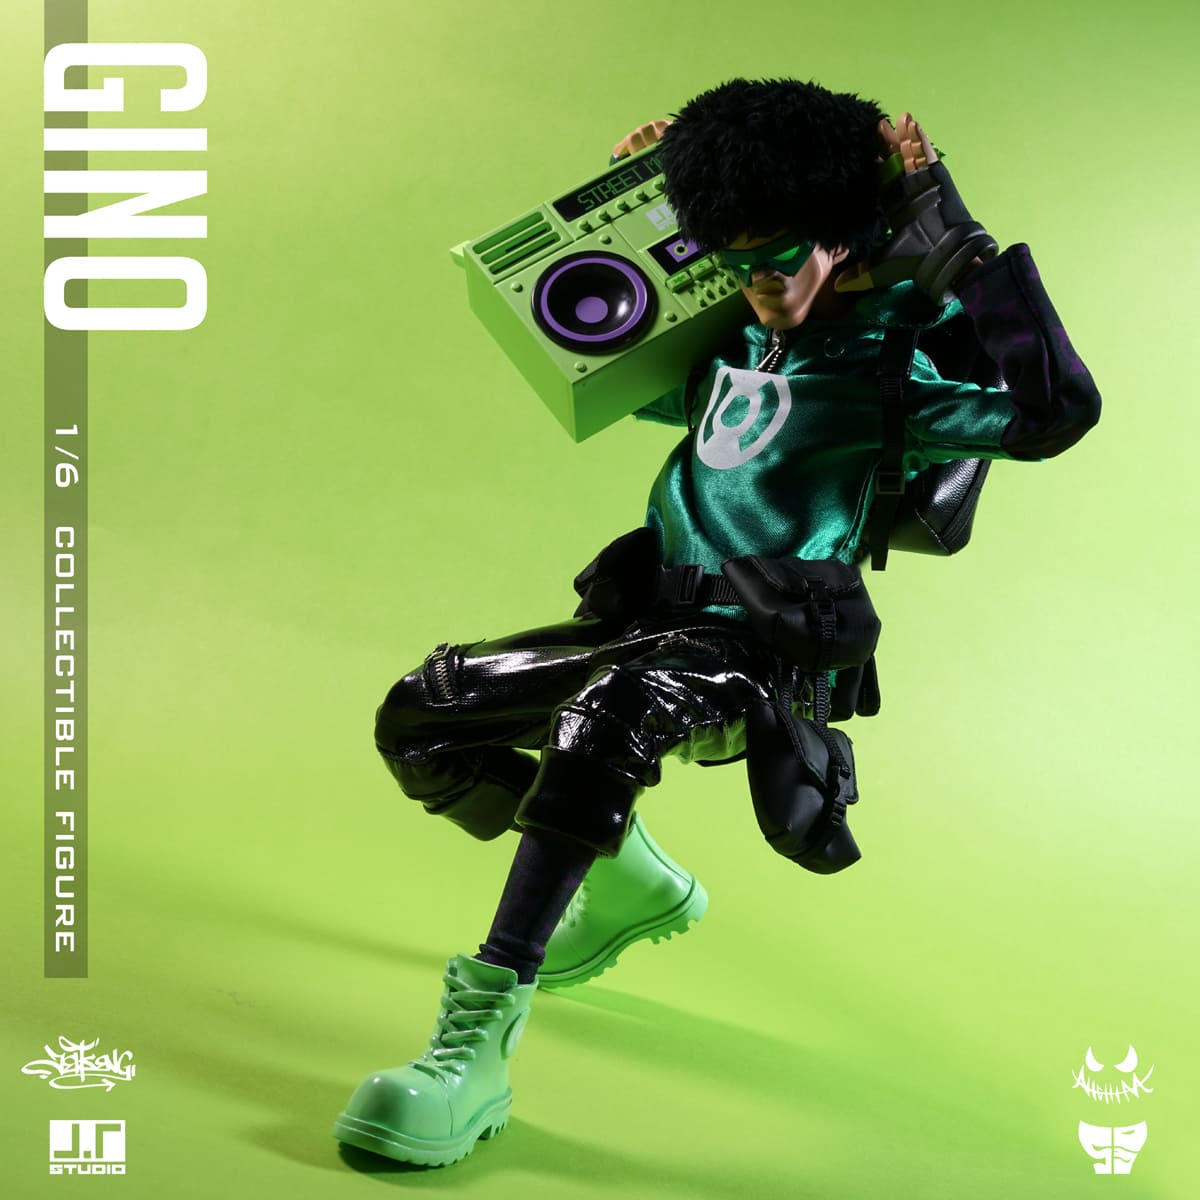 Gino 1/6-scale Street Mask action figure by JT Studio Available Now